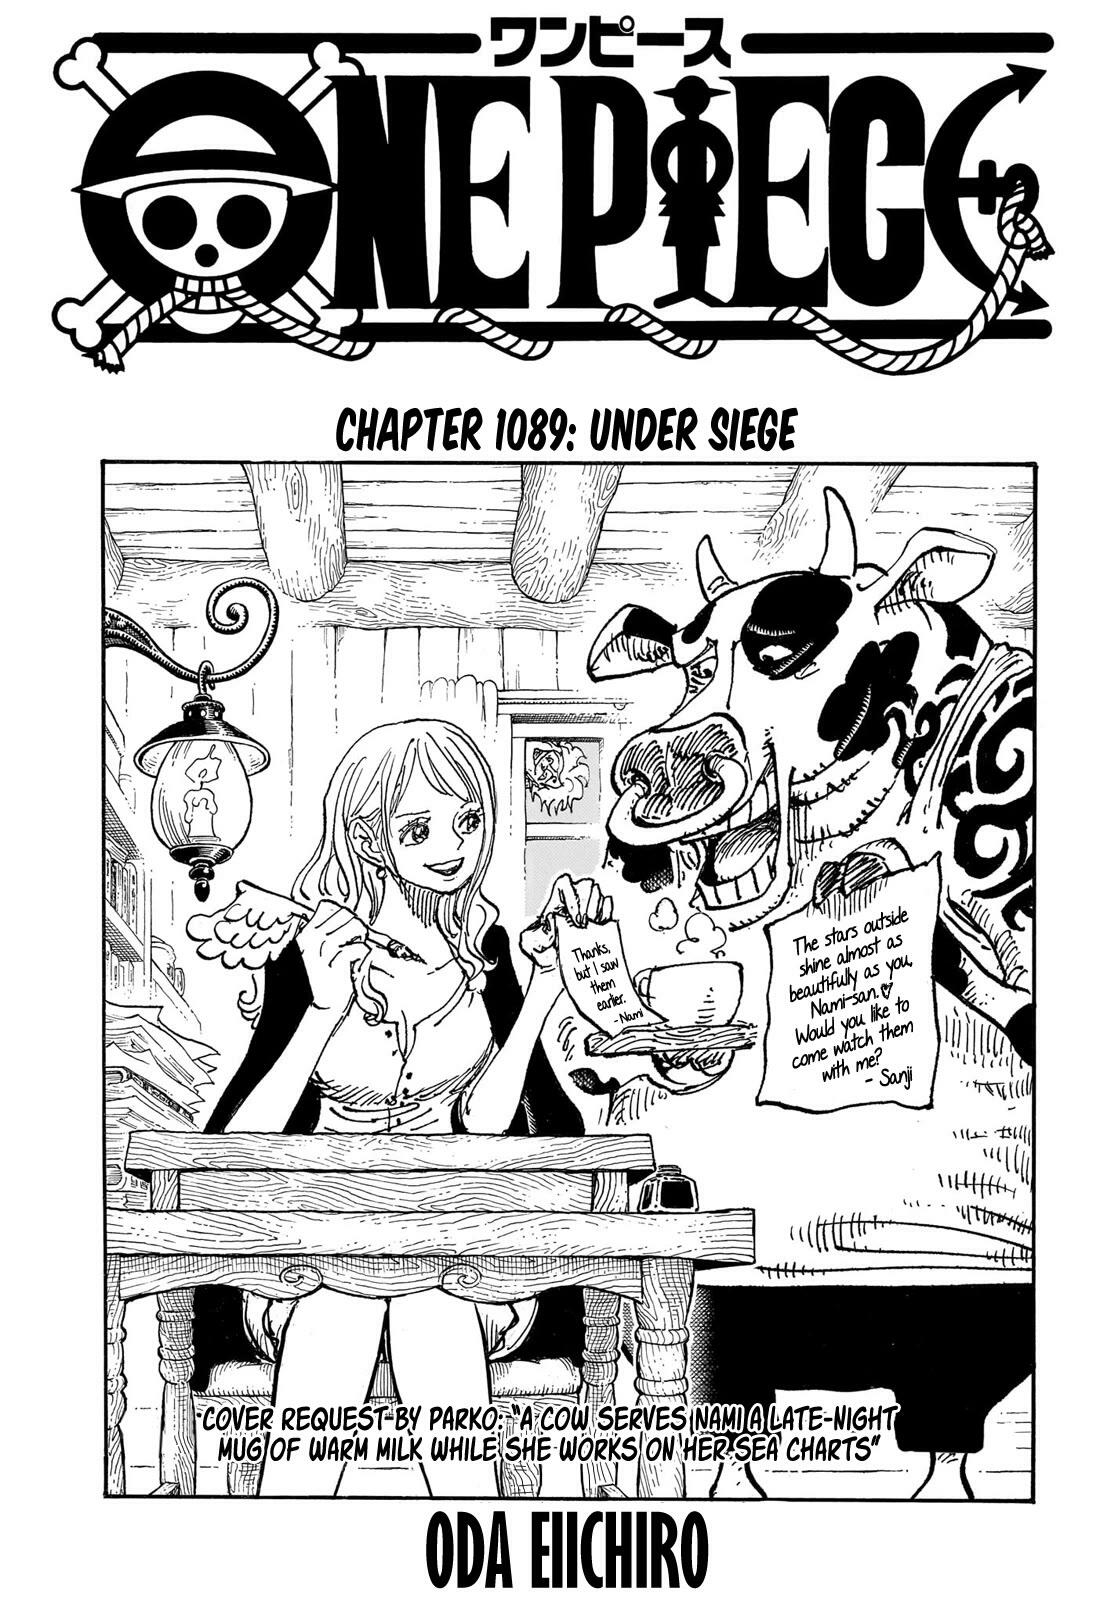 One Piece Chapter 1057 sadly on a break, new release date confirmed